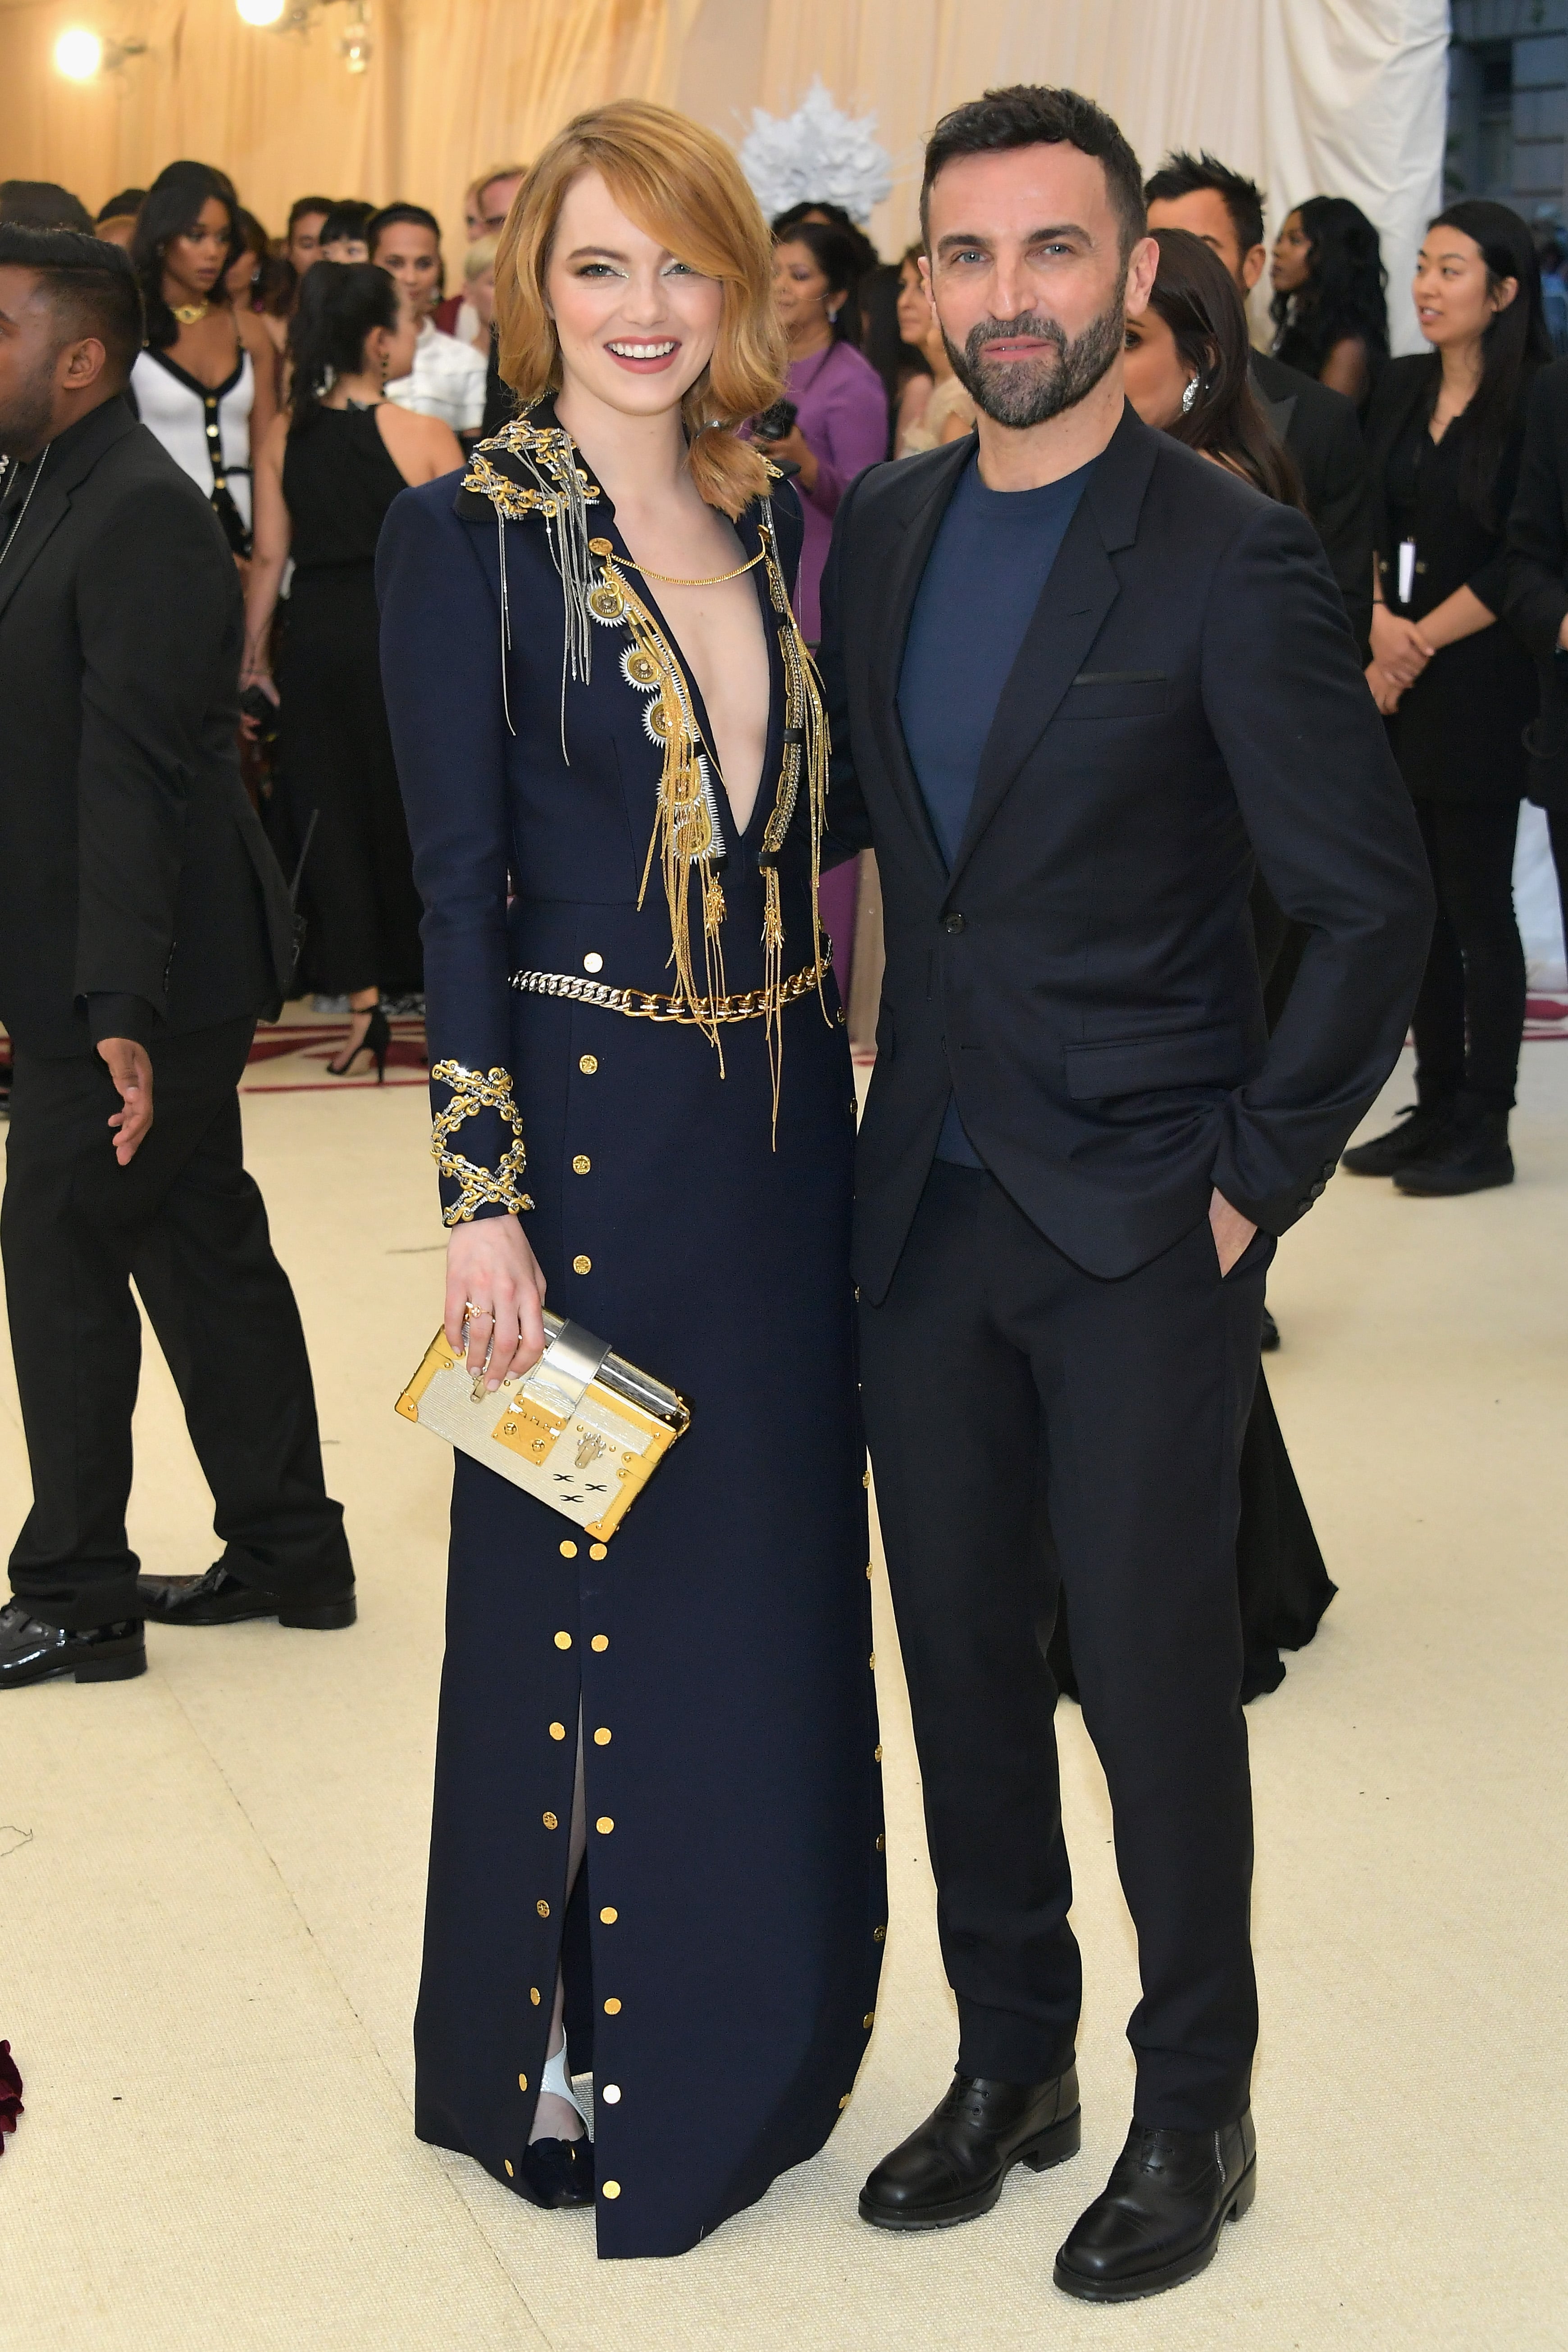 Stonefield — Andrew Garfield and Emma Stone at the MET Gala